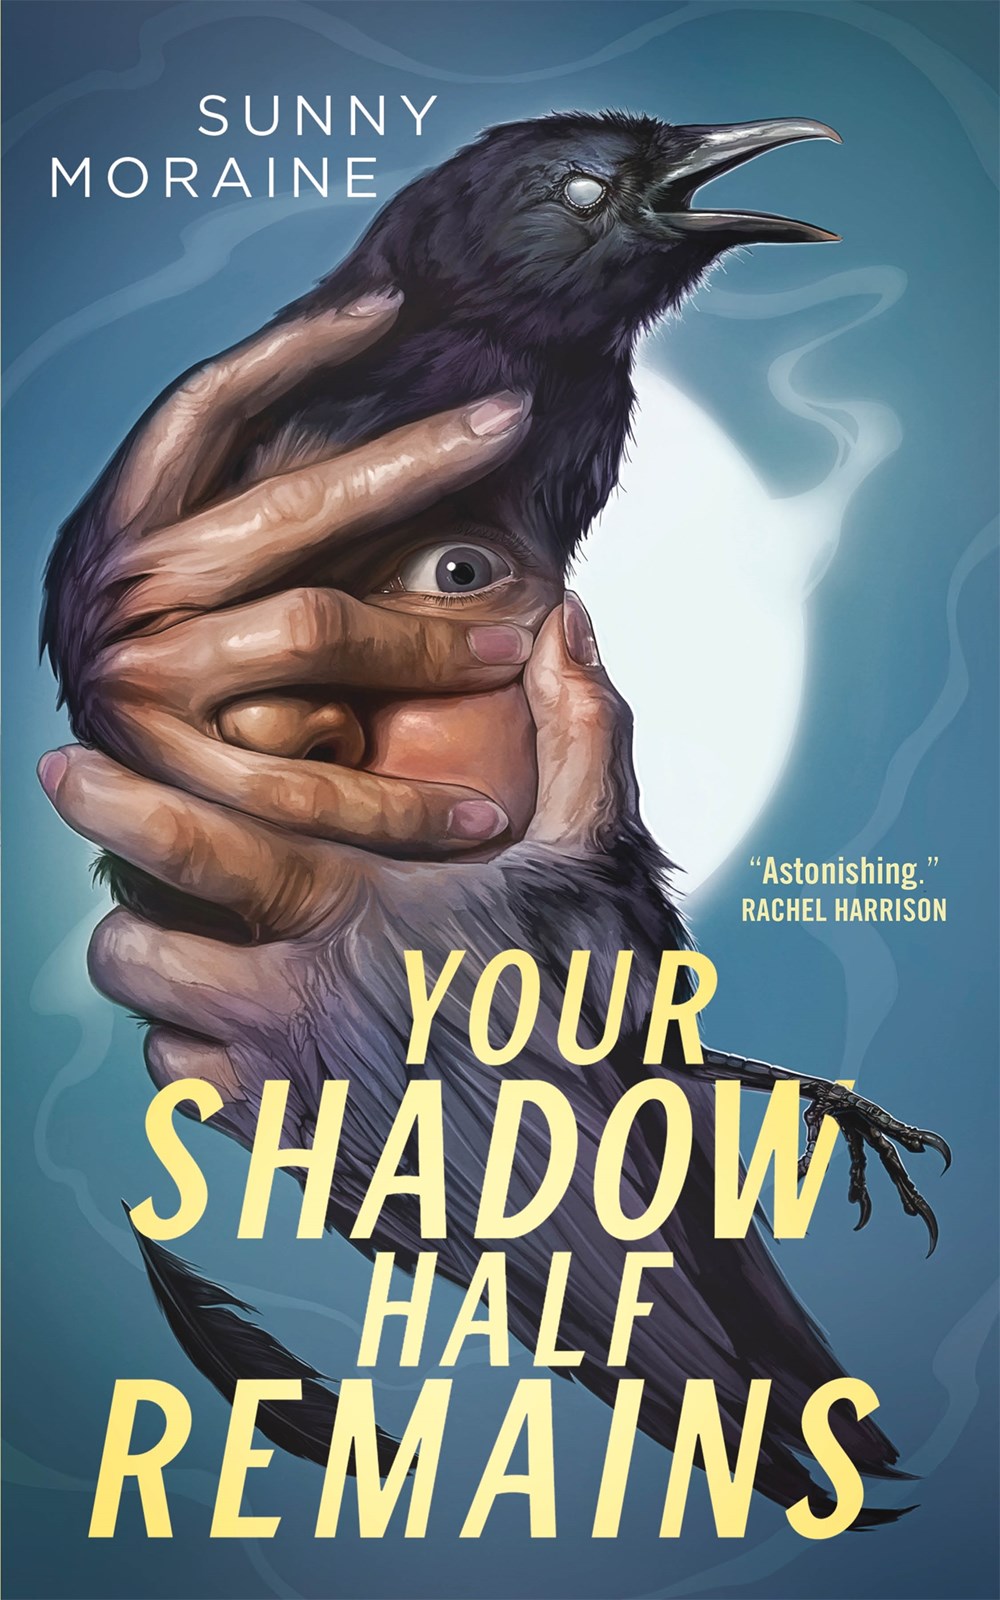 Your Shadow Half Remains by Sunny Moraine